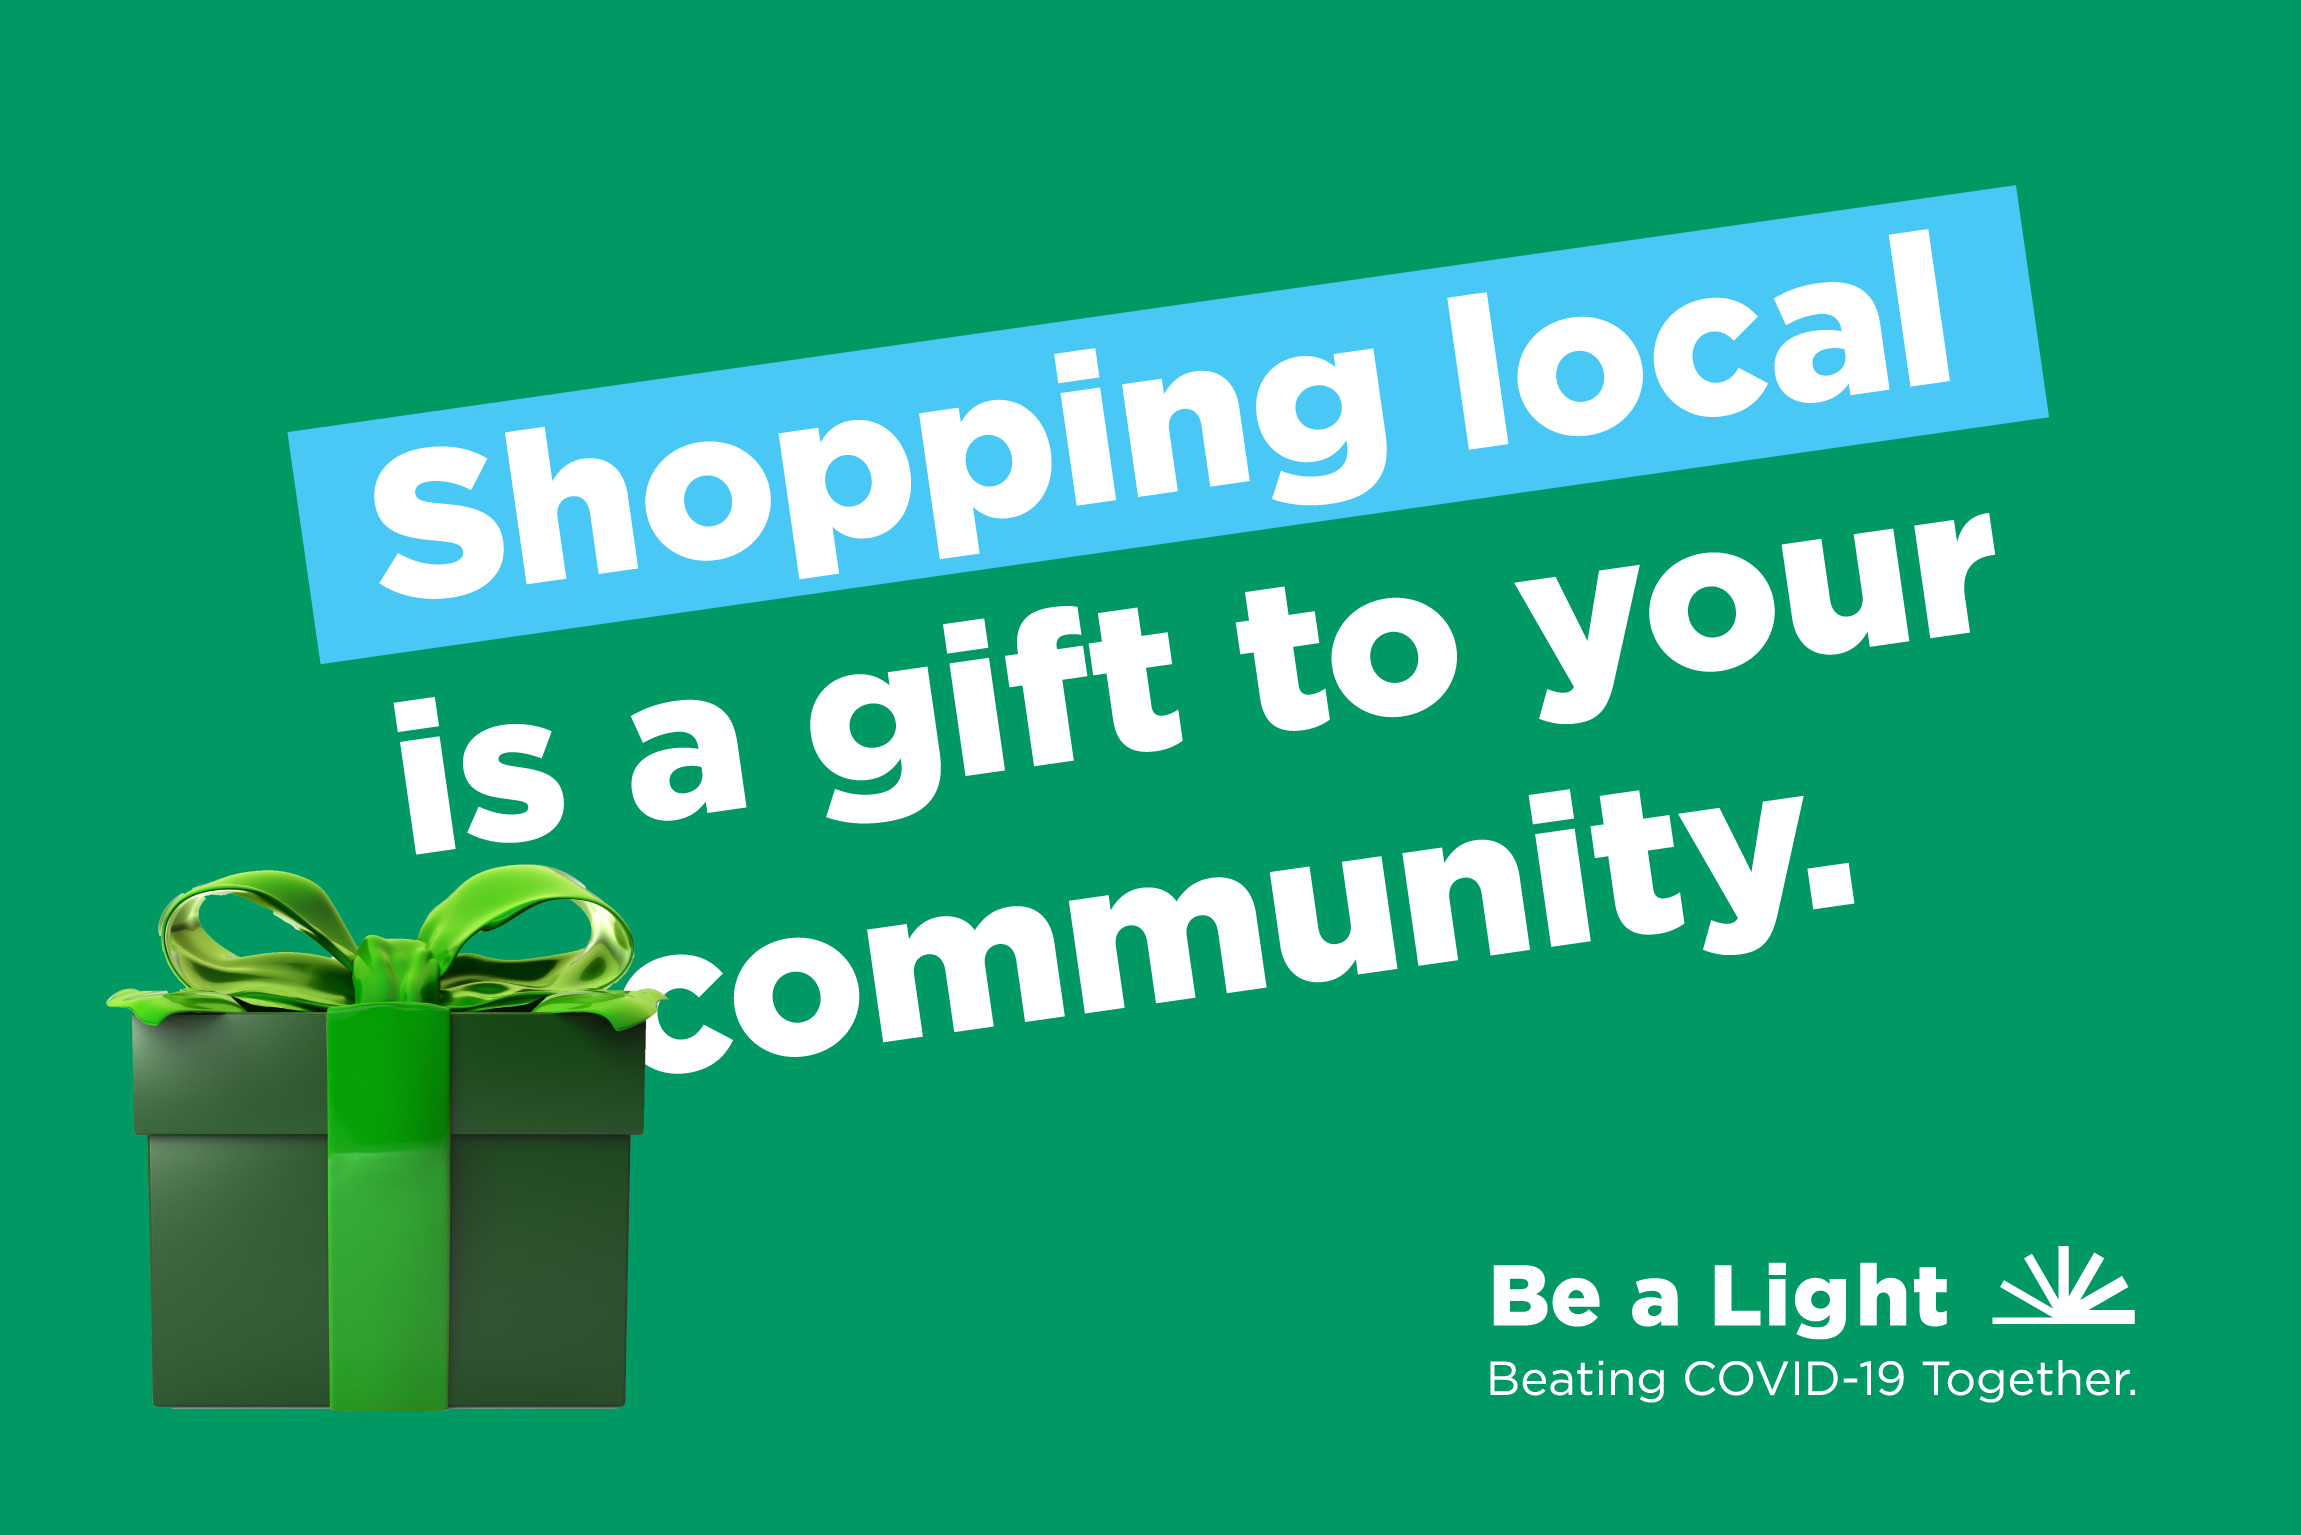 Shop local advertisement for Be a Light campaign